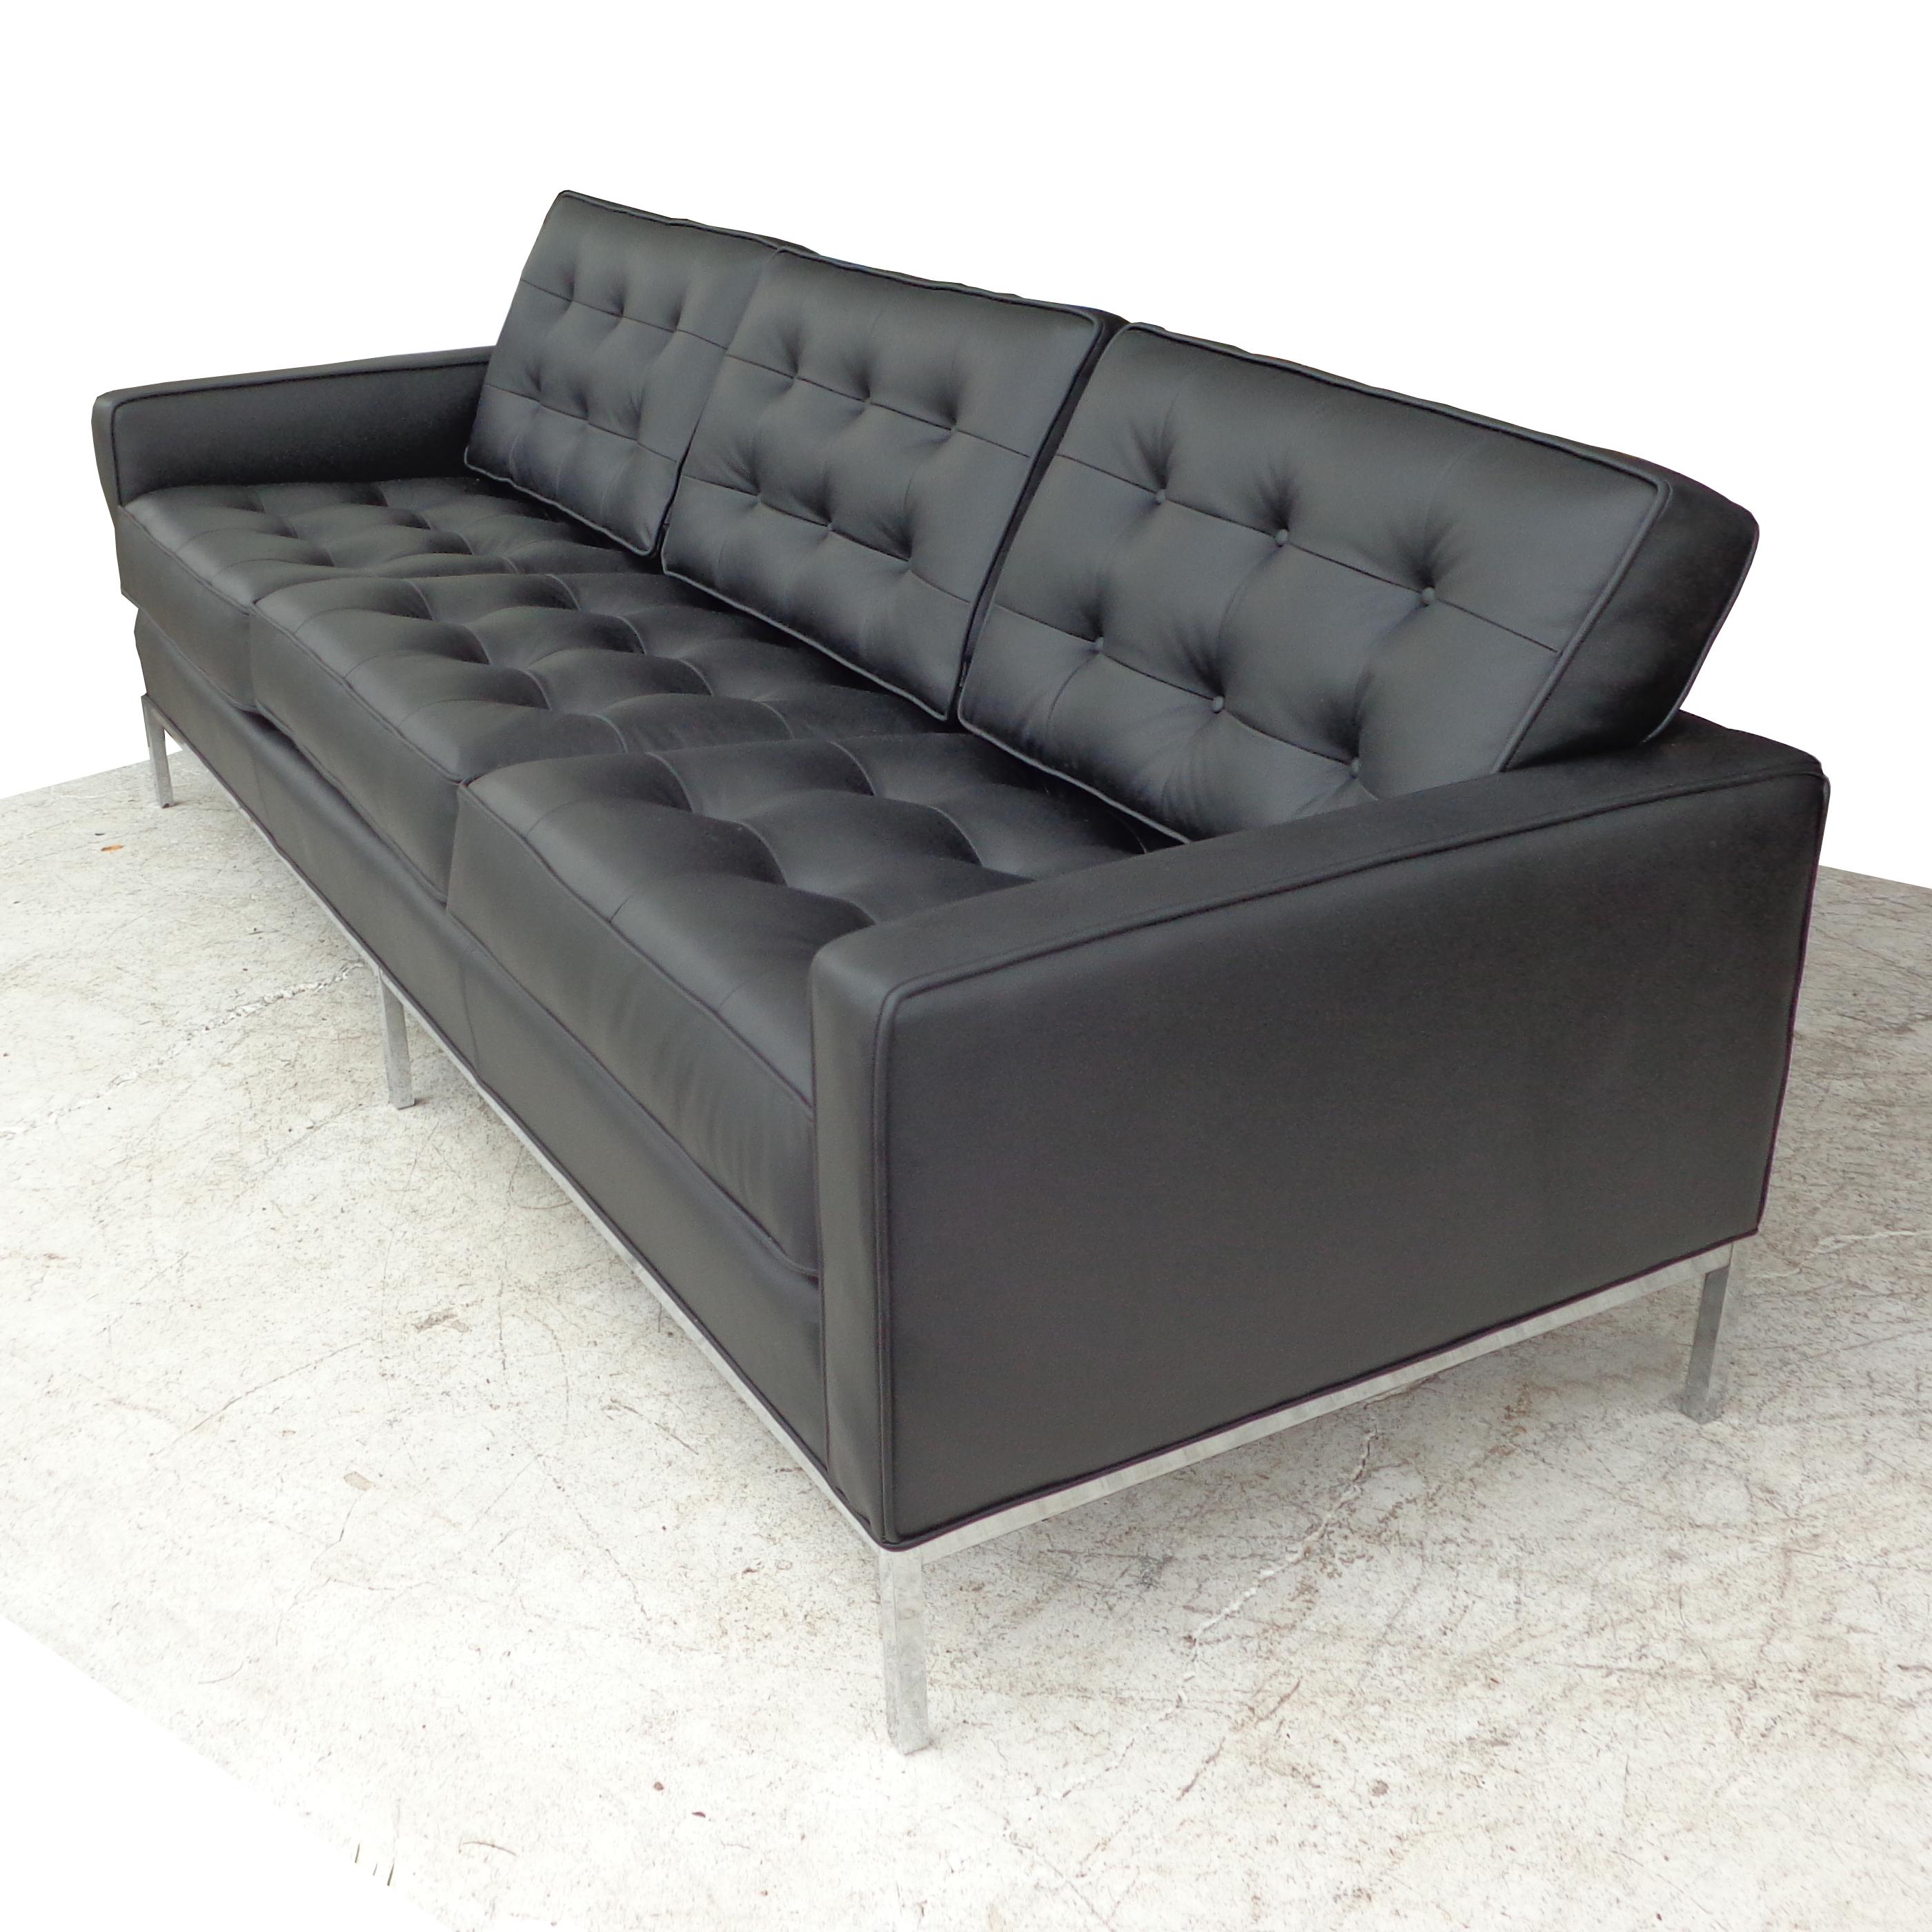 A midcentury Knoll classic designed by Florence Knoll. This three person sofa features tufted black leather upholstery with chrome plated steel legs. Measures: 90